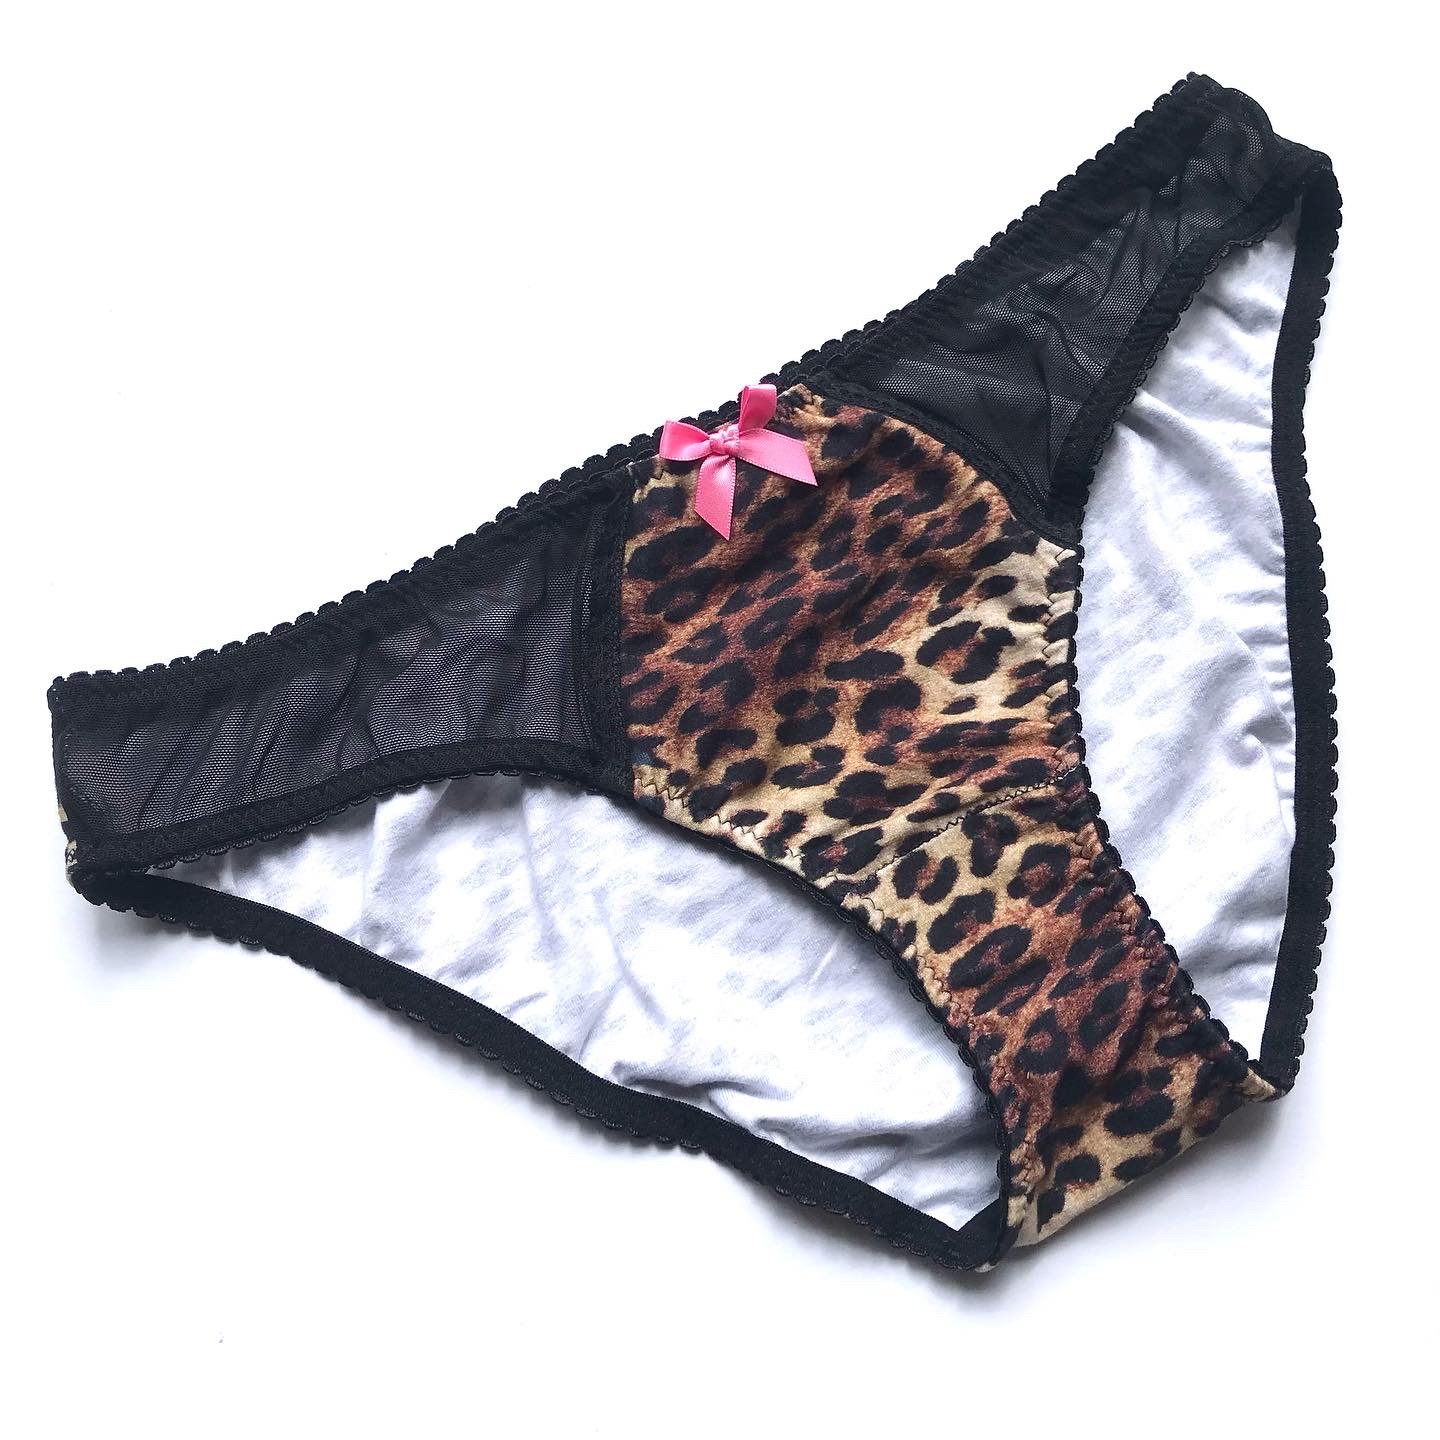 Pocket Panties - Leopard Print  Hid-In Classic Shop - variety of